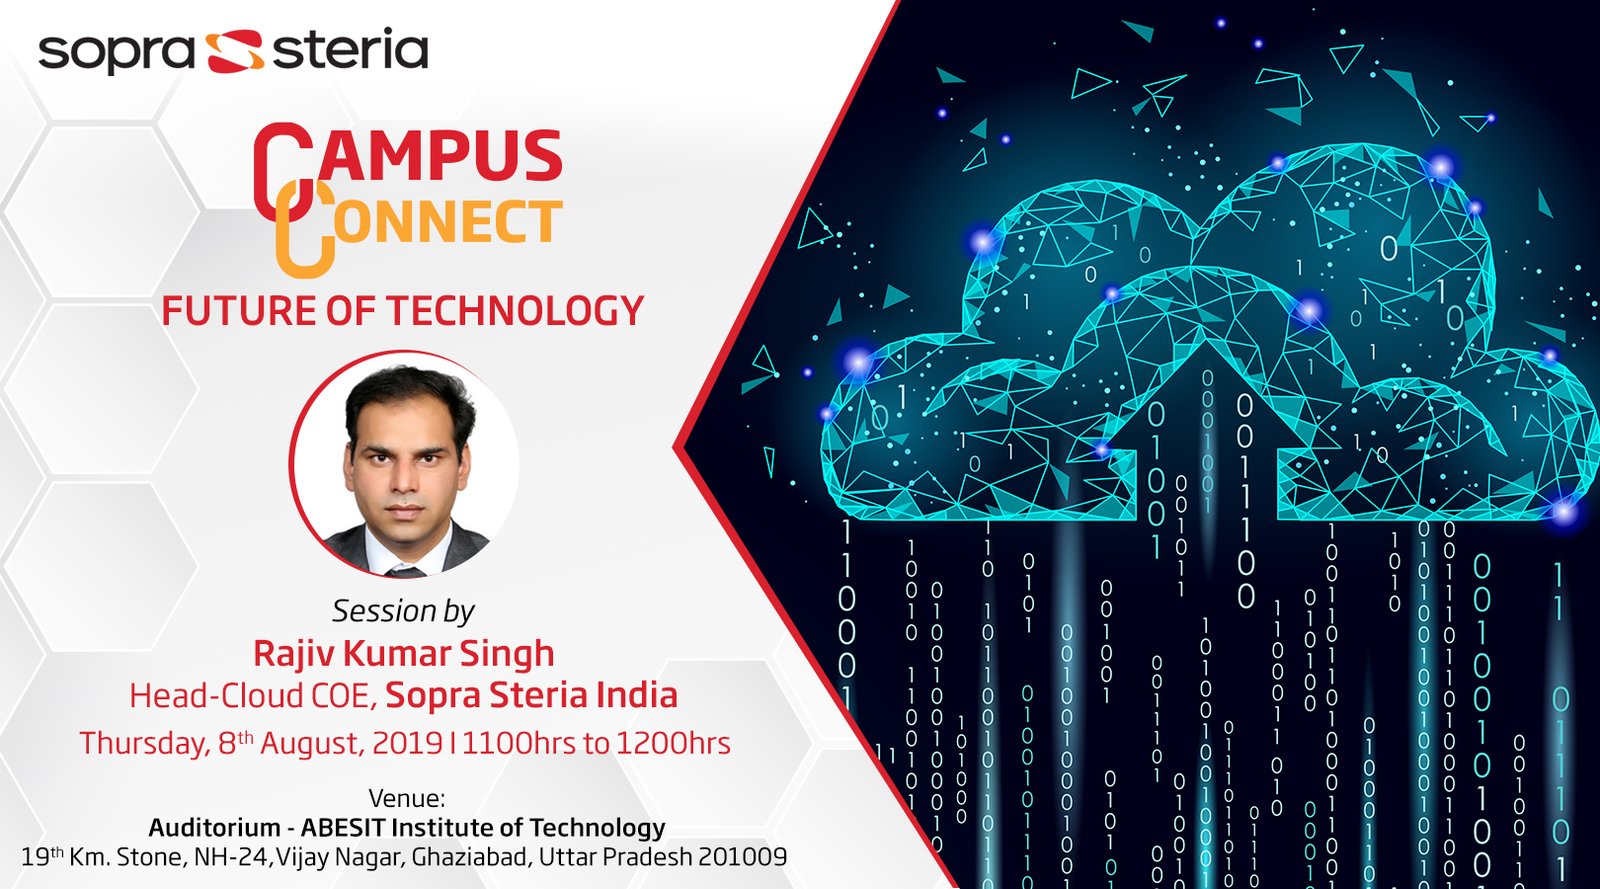 Institution’s Innovation Cell (IIC) of ABESIT is conducting an Expert talk on “Future of Technology” by Mr Rajiv Kumar Singh, Head-Cloud COE, Sopra Steria India.